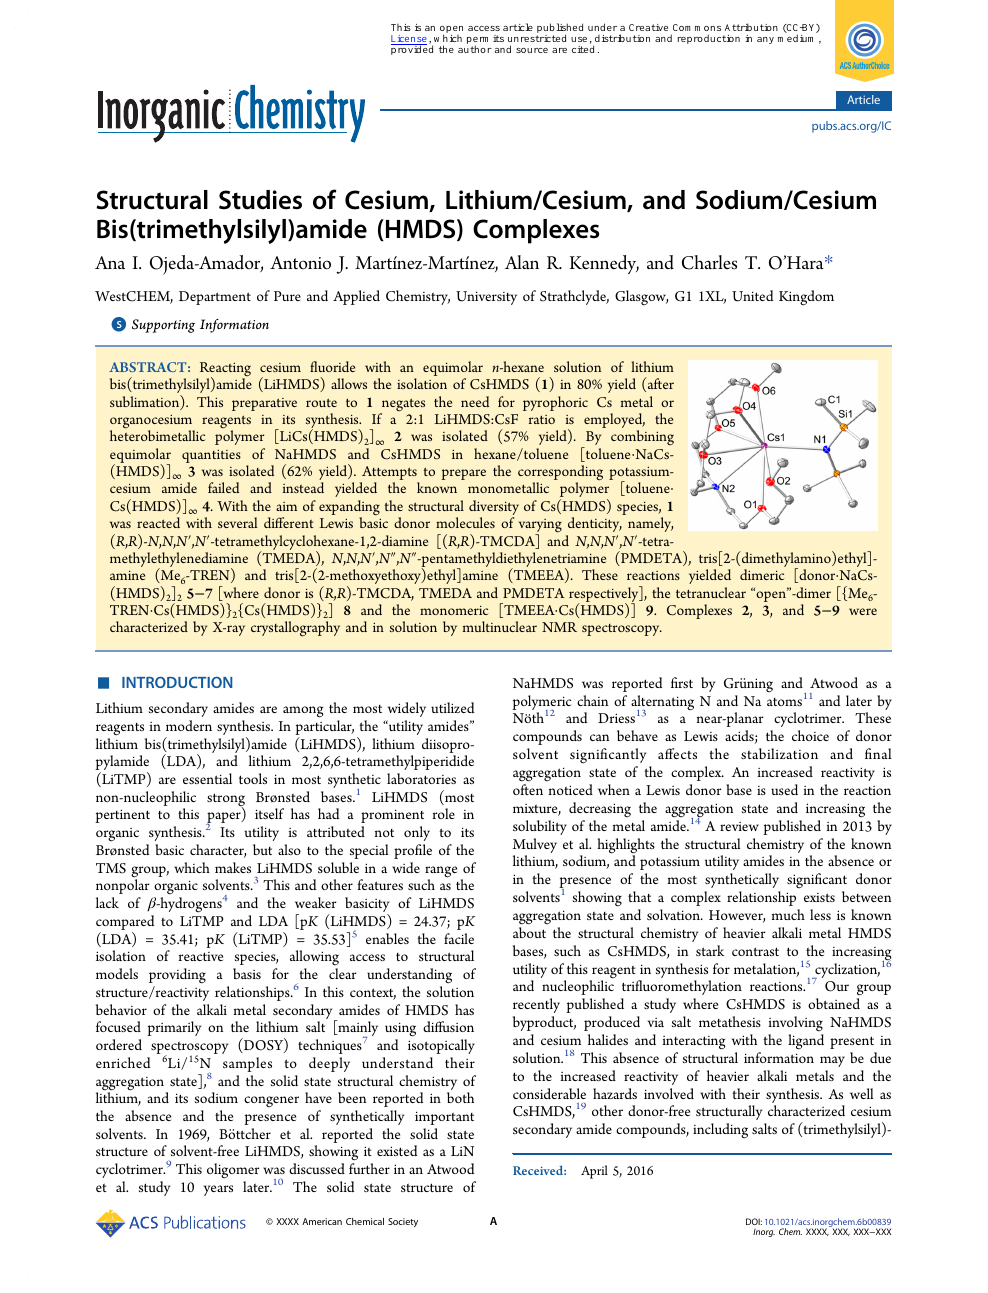 Structural Studies Of Cesium Lithium Cesium And Sodium Cesium Bis Trimethylsilyl Amide Hmds Complexes Topic Of Research Paper In Chemical Sciences Download Scholarly Article Pdf And Read For Free On Cyberleninka Open Science Hub